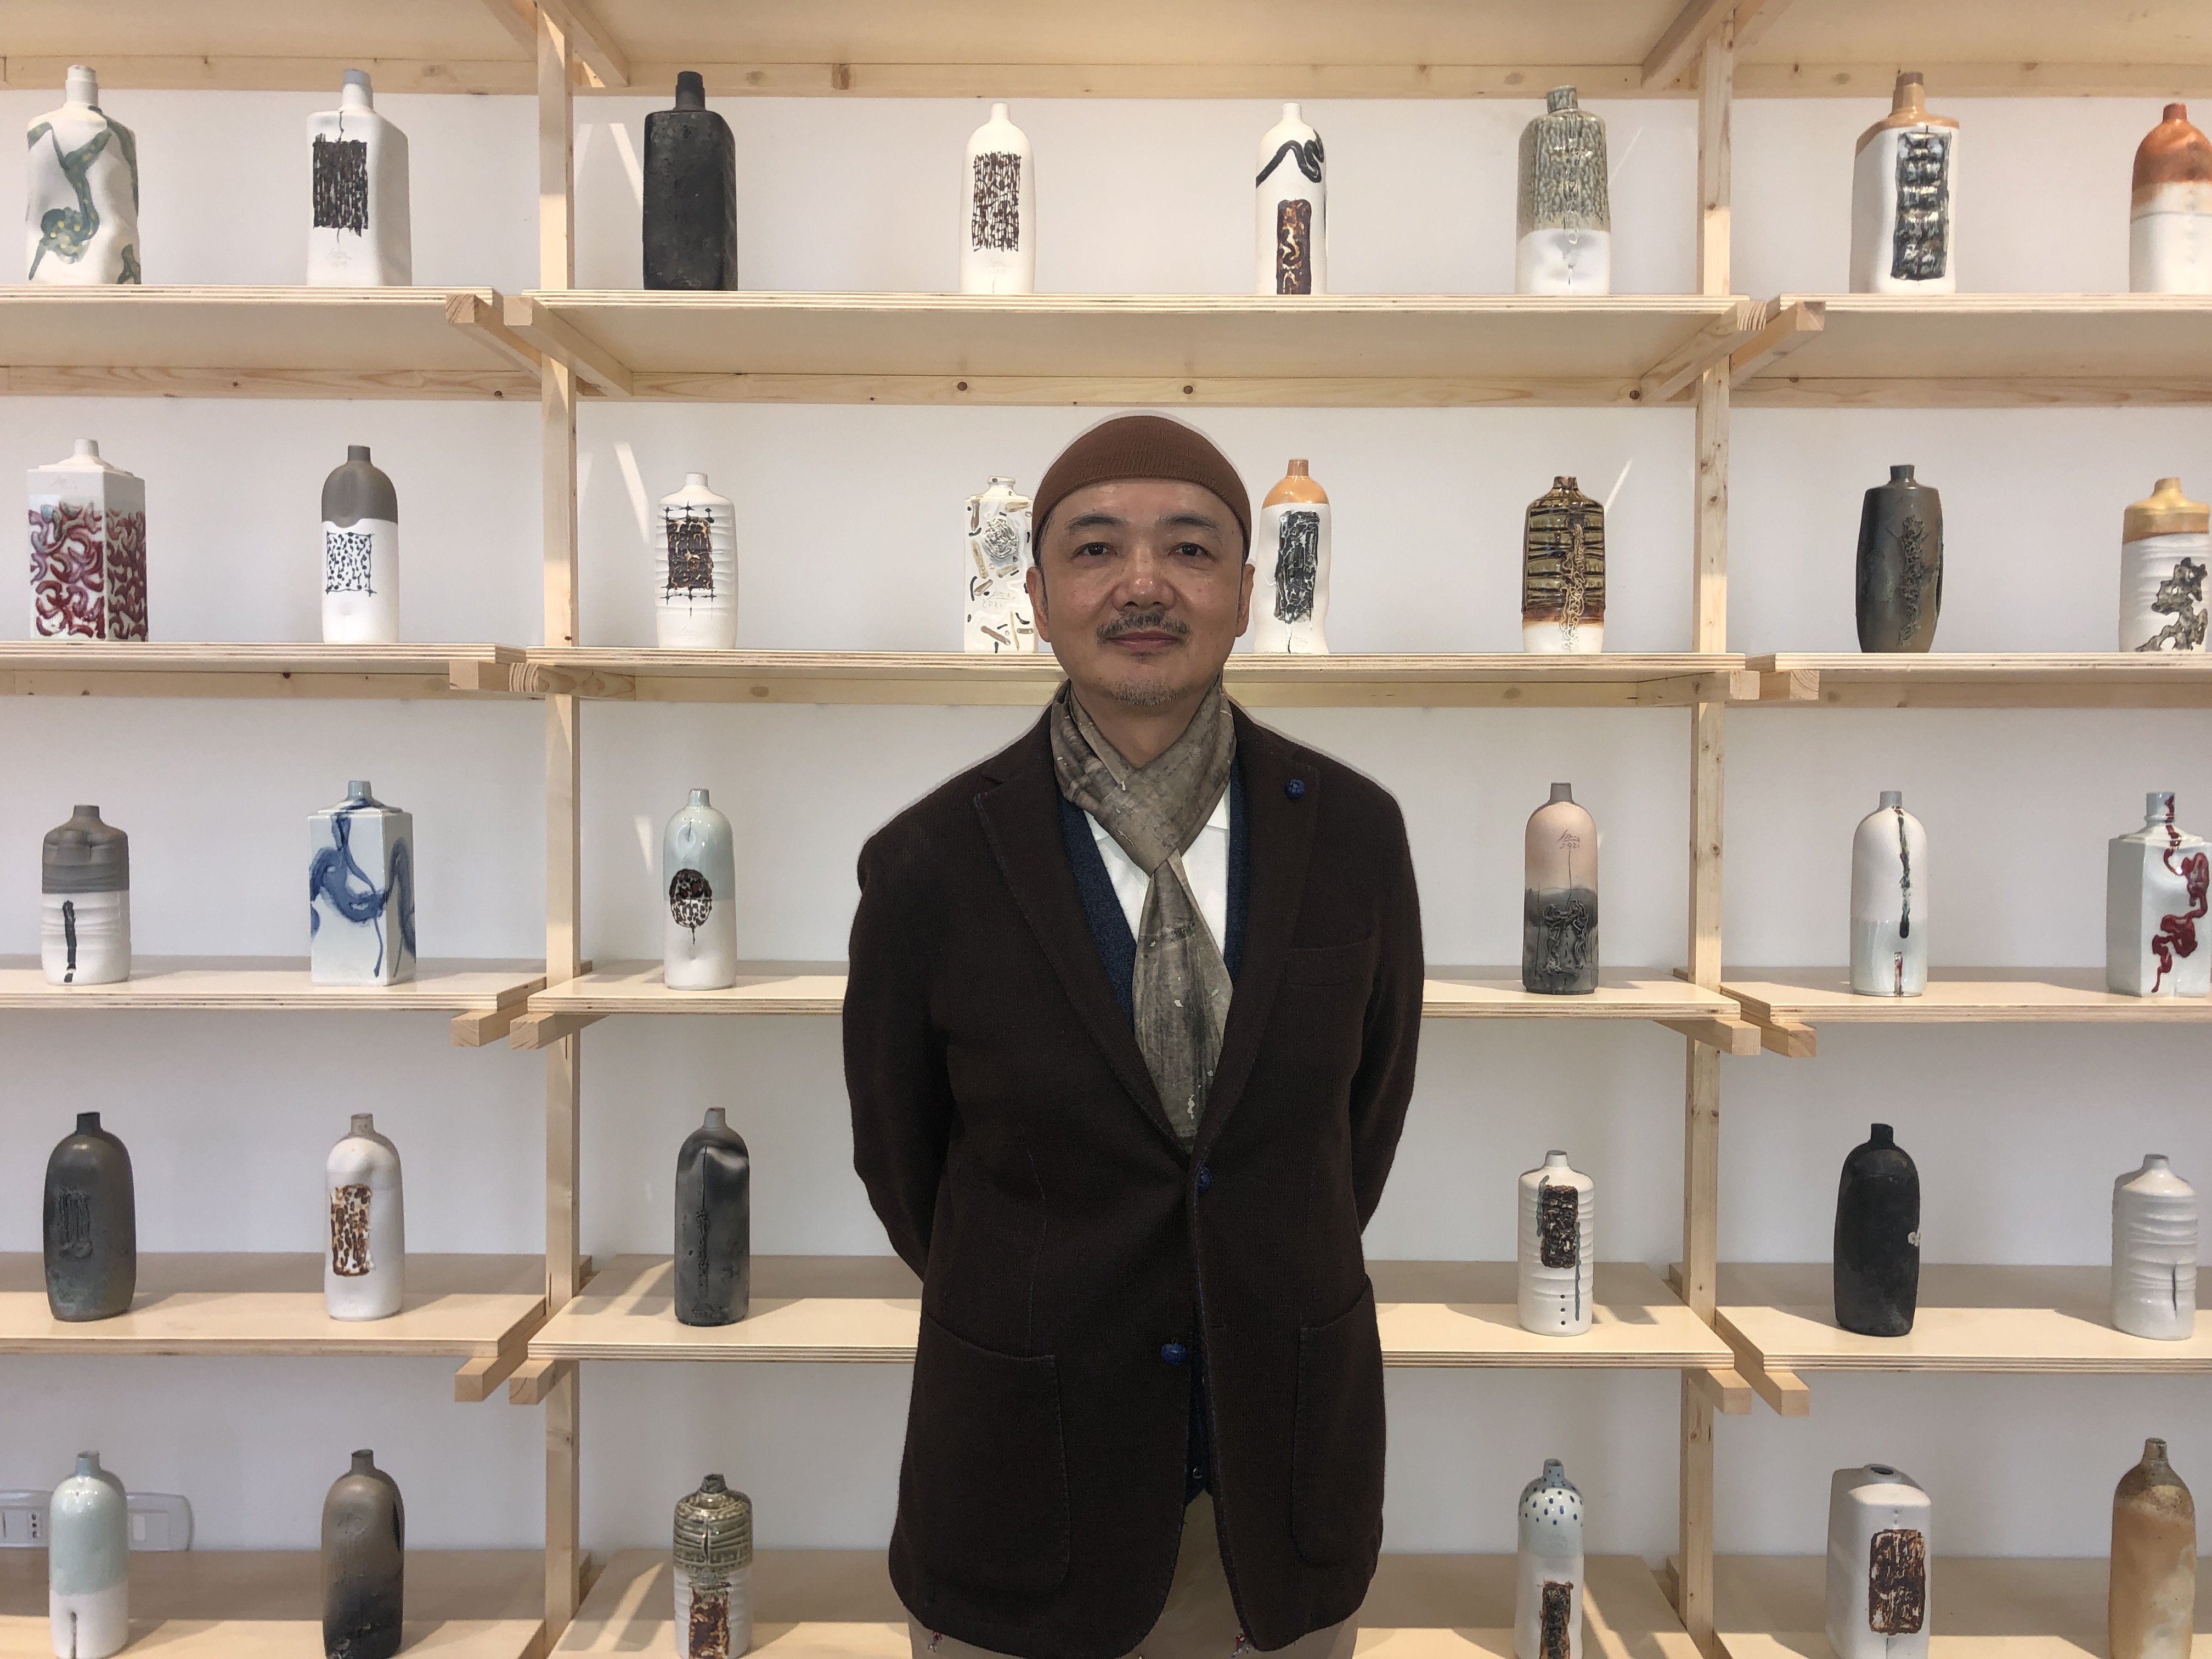 Bai Ming at a retrospective of his career at the National Gallery of Modern and Contemporary Art in Rome, Italy. Photo: Enid Tsui